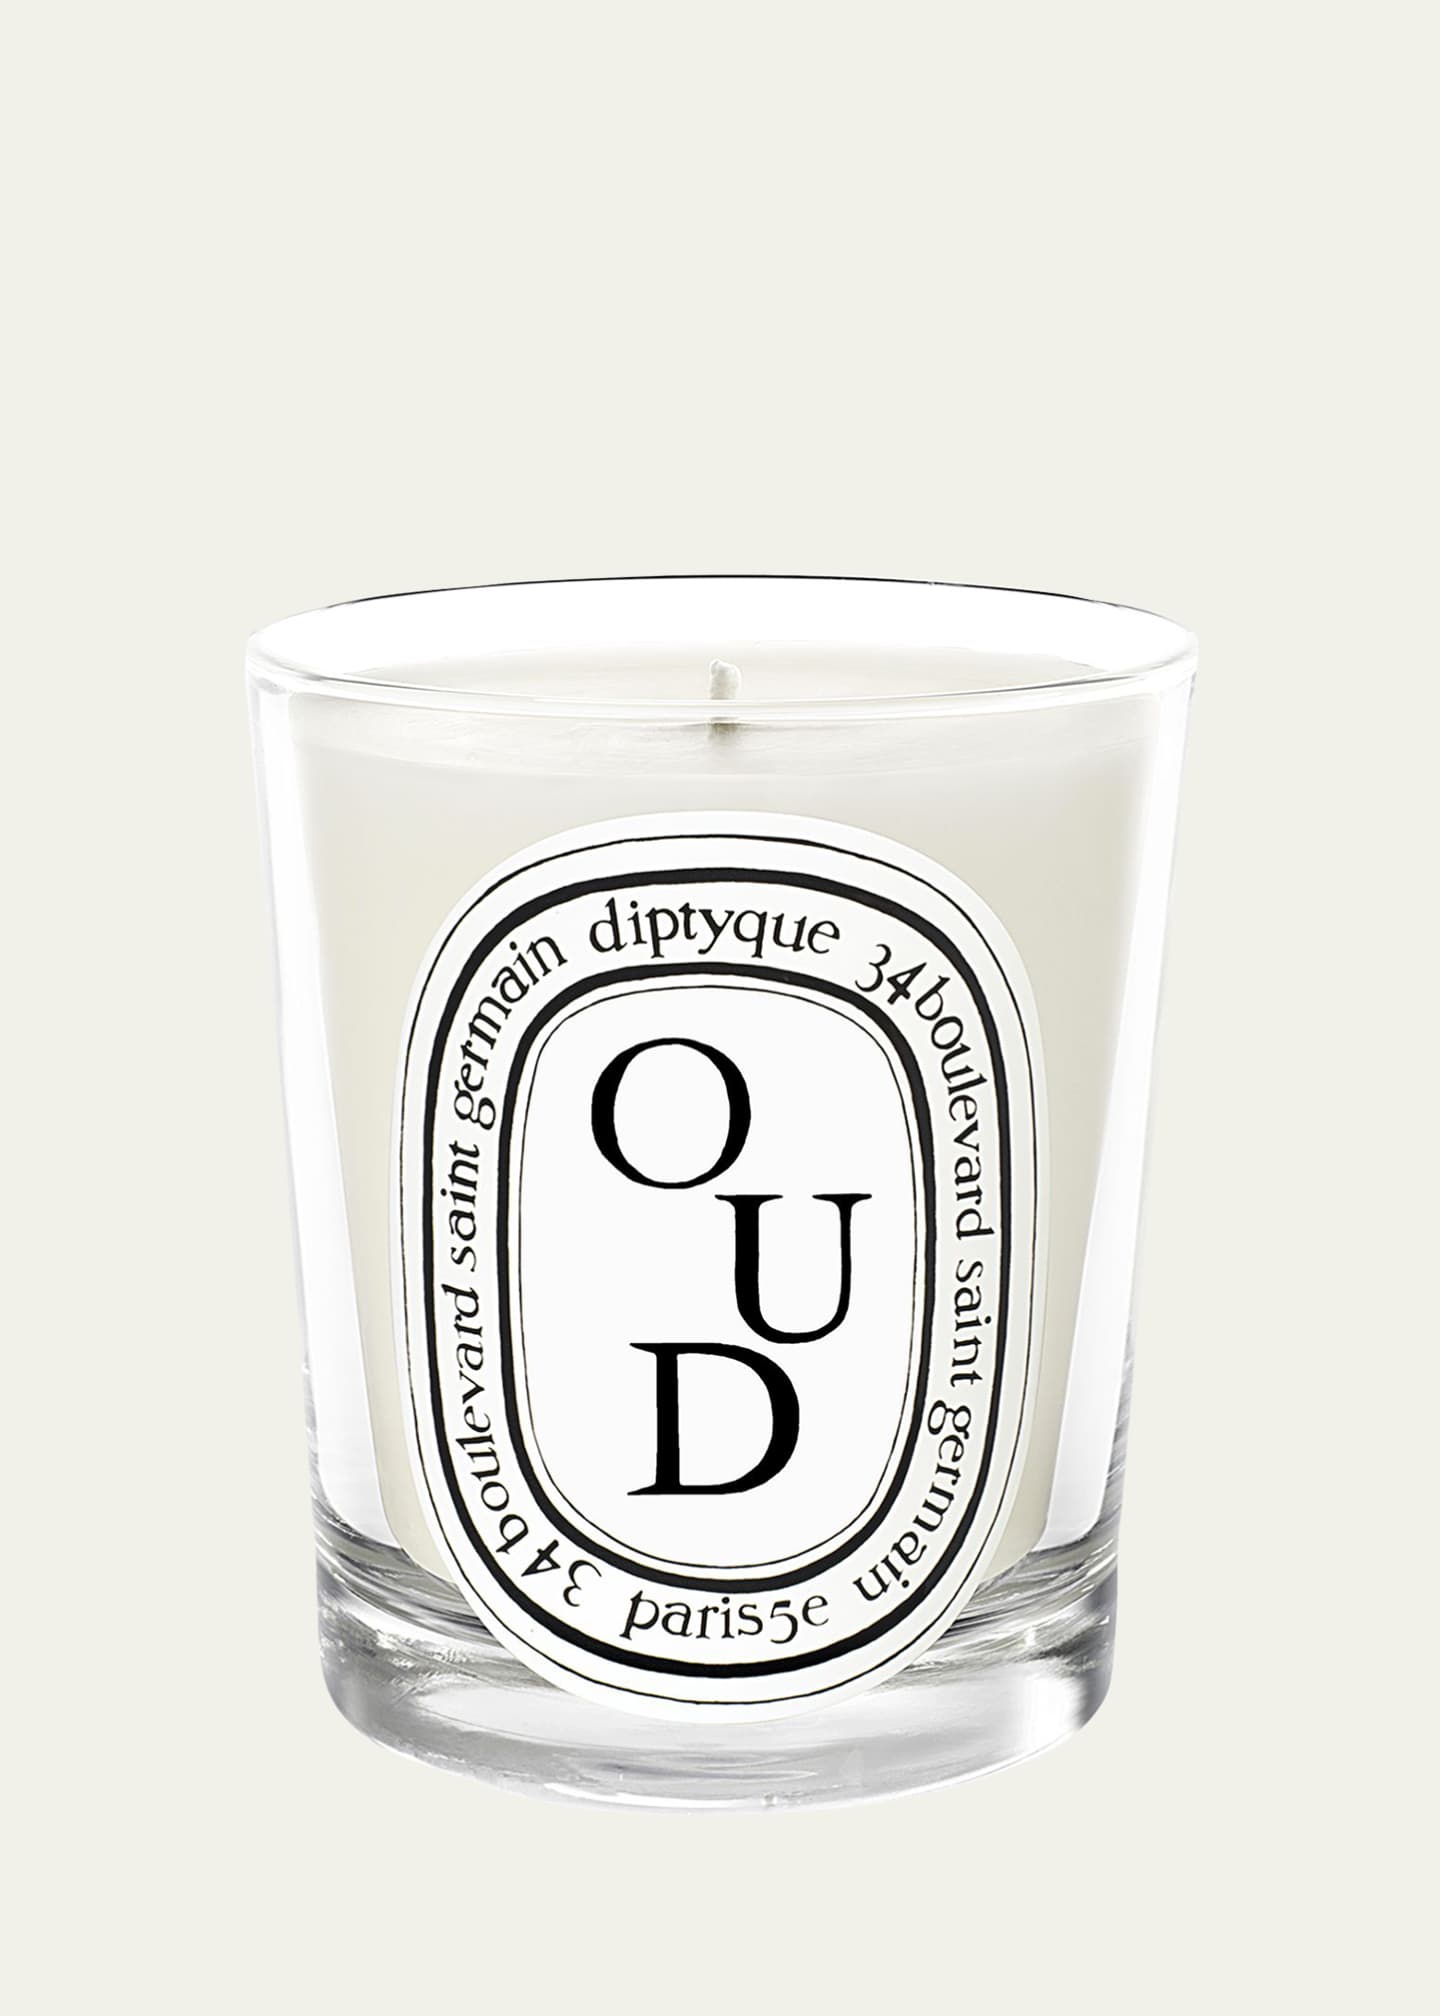 DIPTYQUE Oud Scented Candle, 6.5 oz.